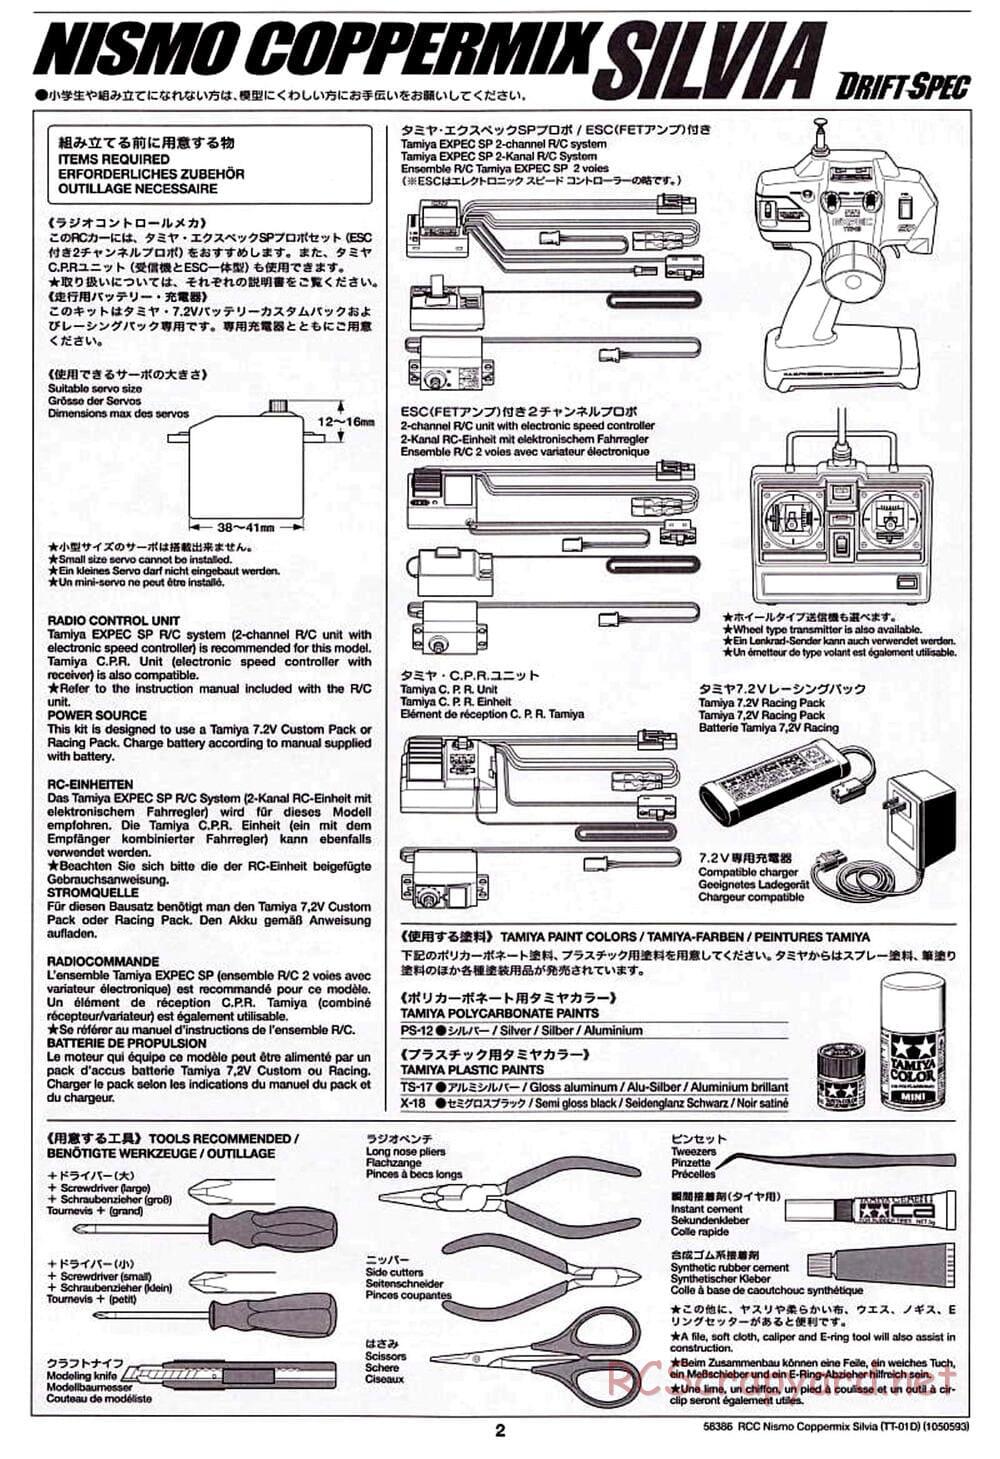 Tamiya - Nismo Coppermix Silvia Drift Spec - TT-01D Chassis - Manual - Page 2